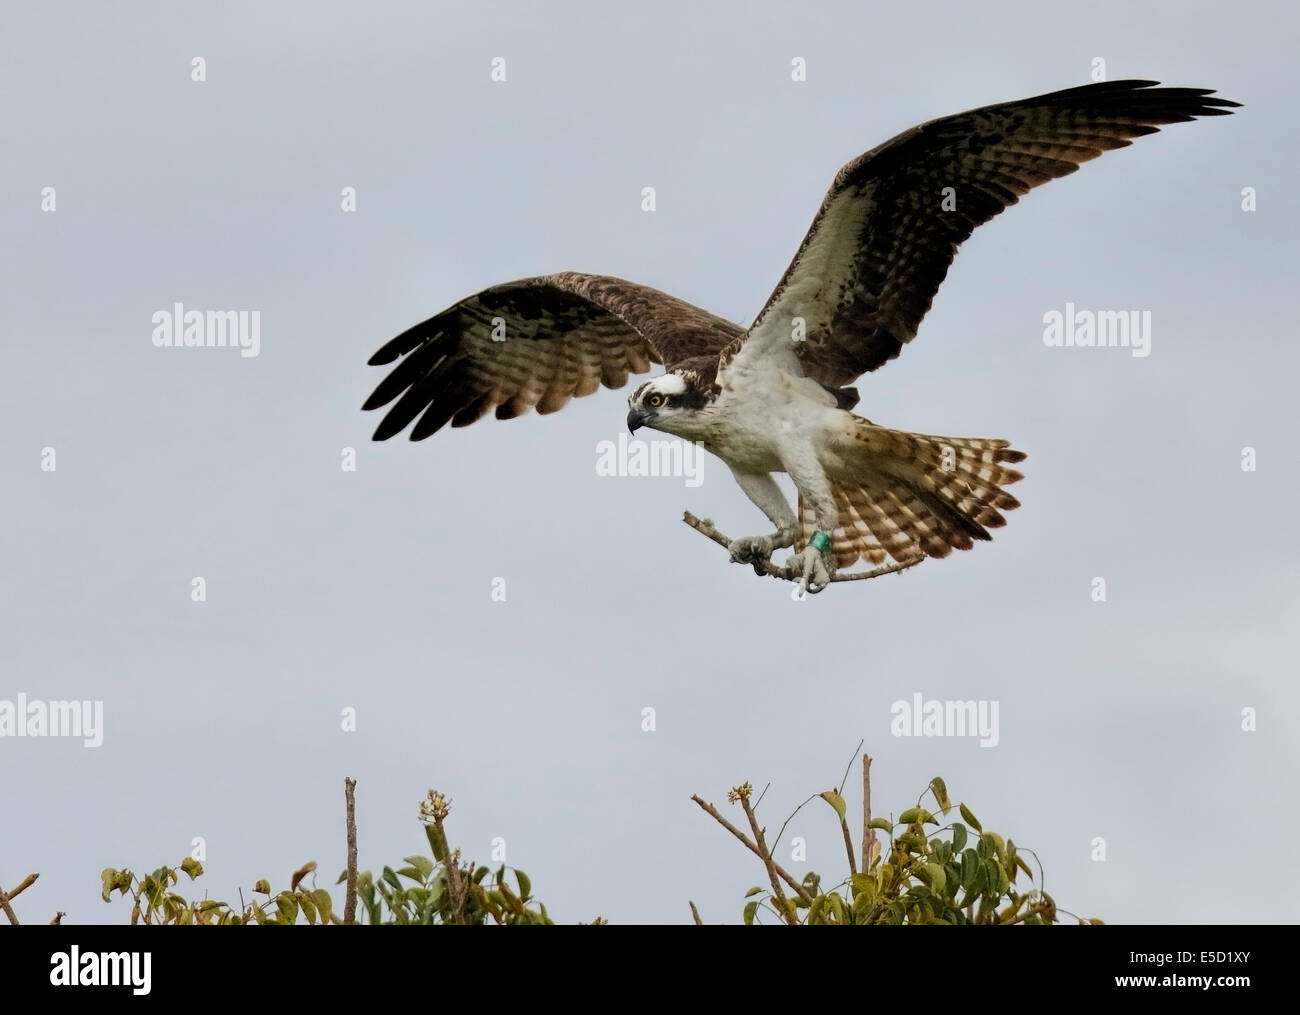 Osprey (Pandion haliaetus) in flight with nesting material Stock Photo